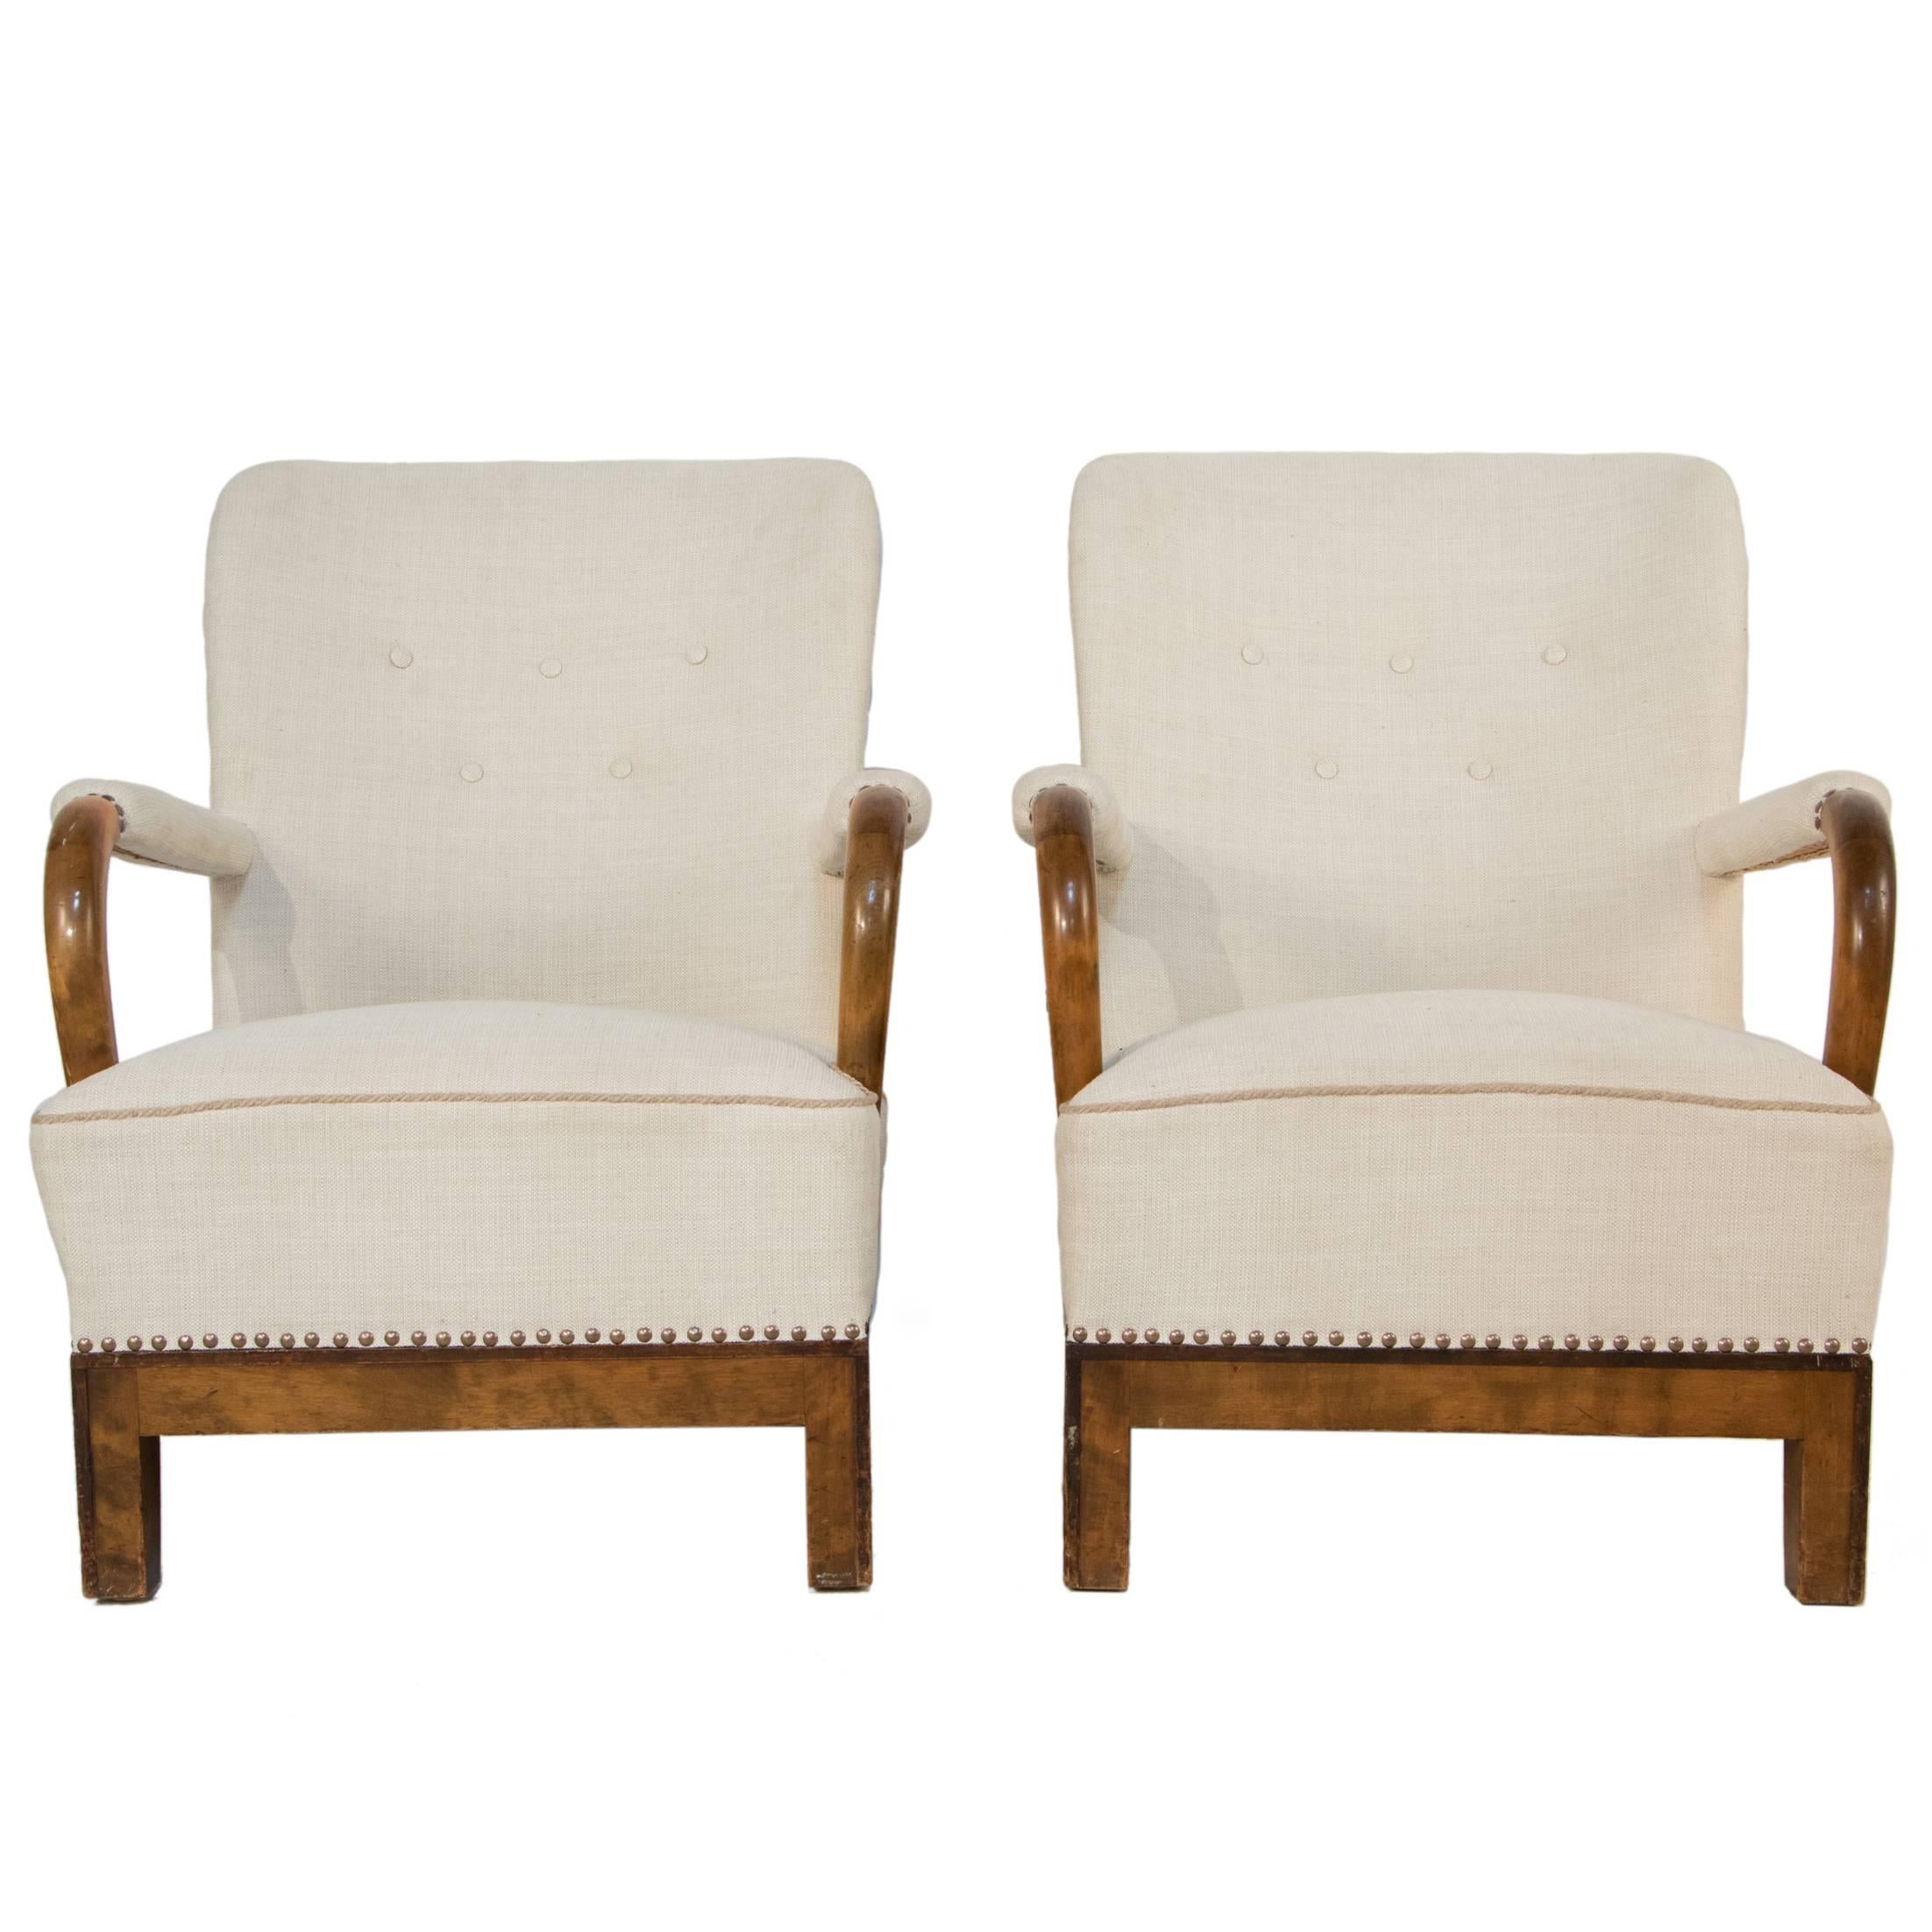 Pair of Swedish Grace Lounge Chairs For Sale